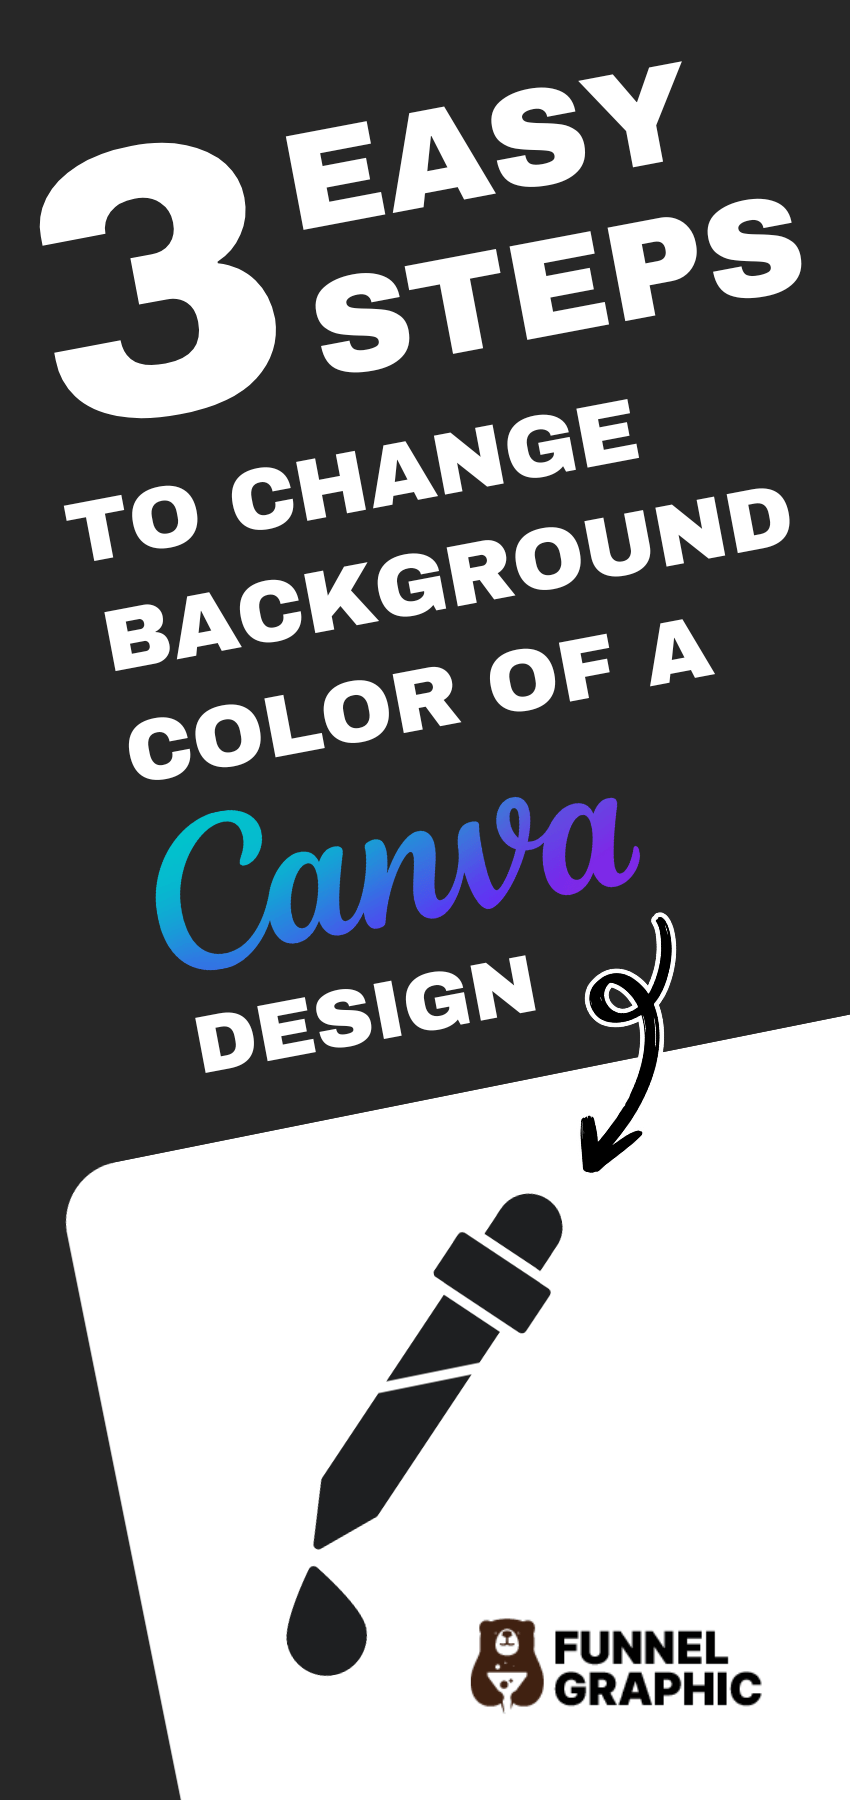 change background color of a canva design with icon of a color picker